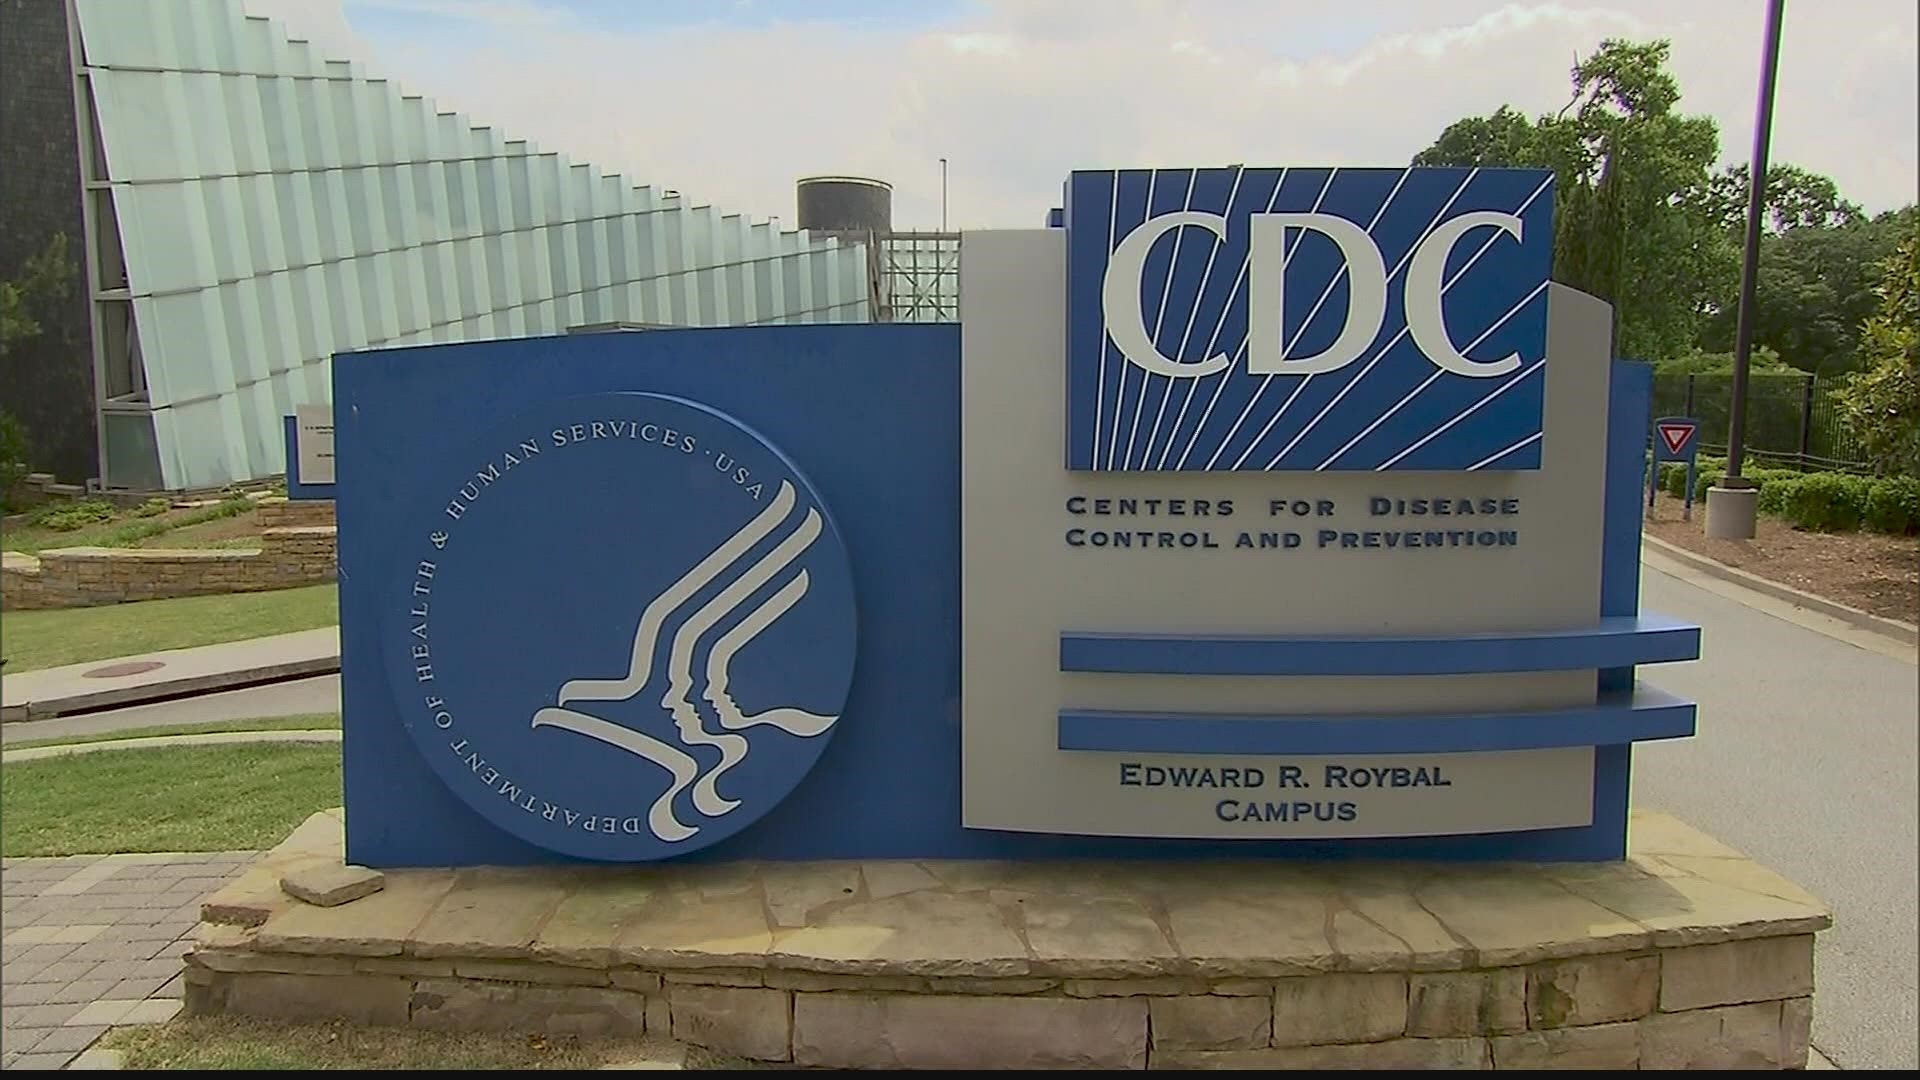 The CDC said the U.S. is now seeing 110,000 new cases of COVID every day.